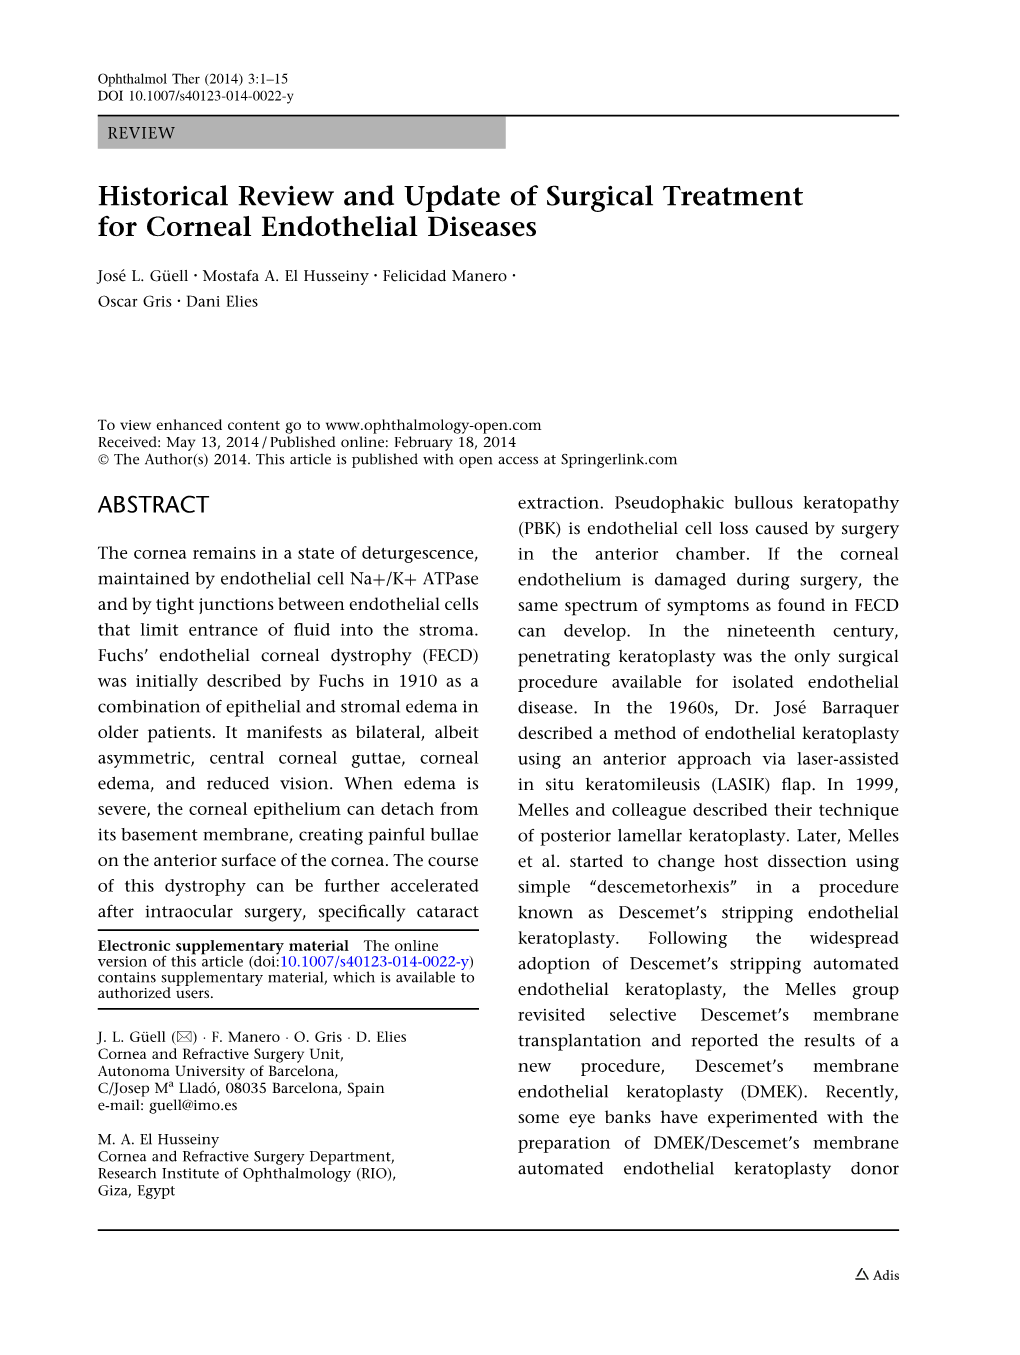 Historical Review and Update of Surgical Treatment for Corneal Endothelial Diseases